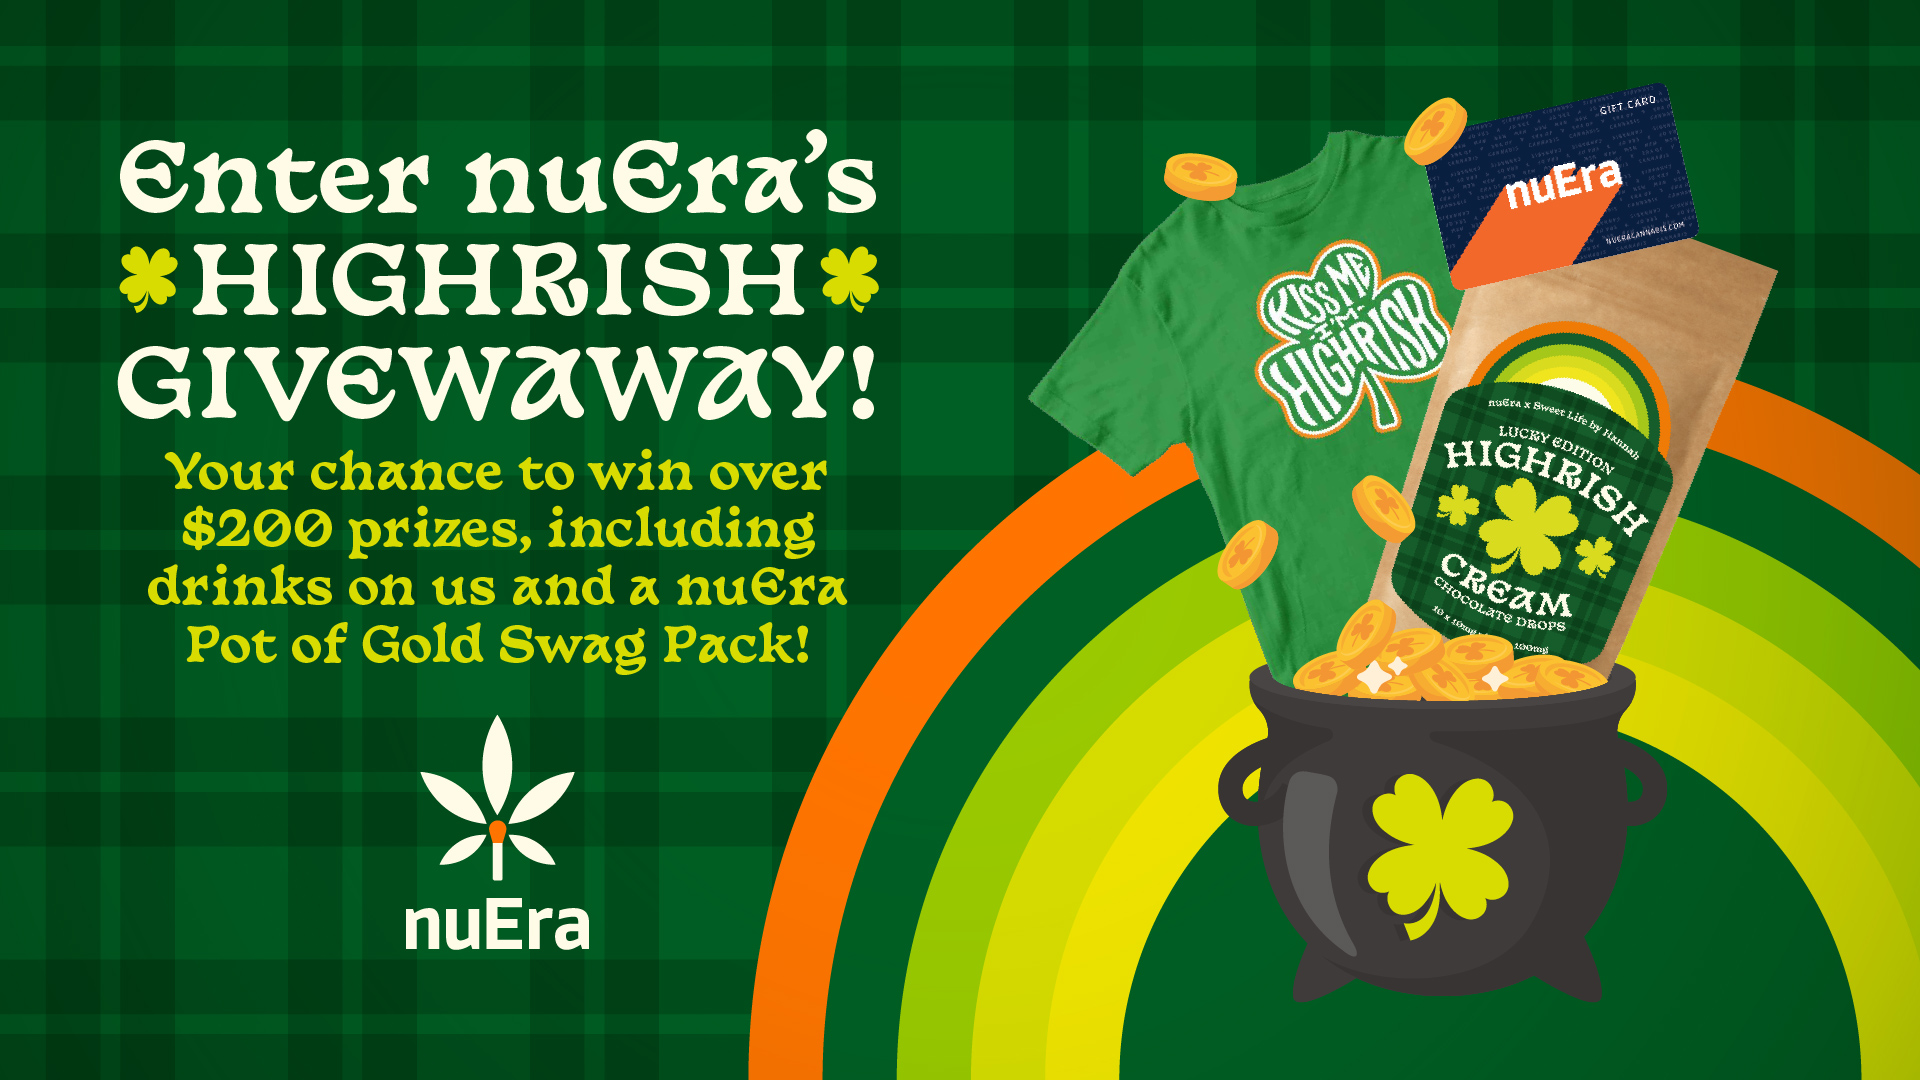 Enter nuEra's Highrish Giveaway for St. Patrick's Day